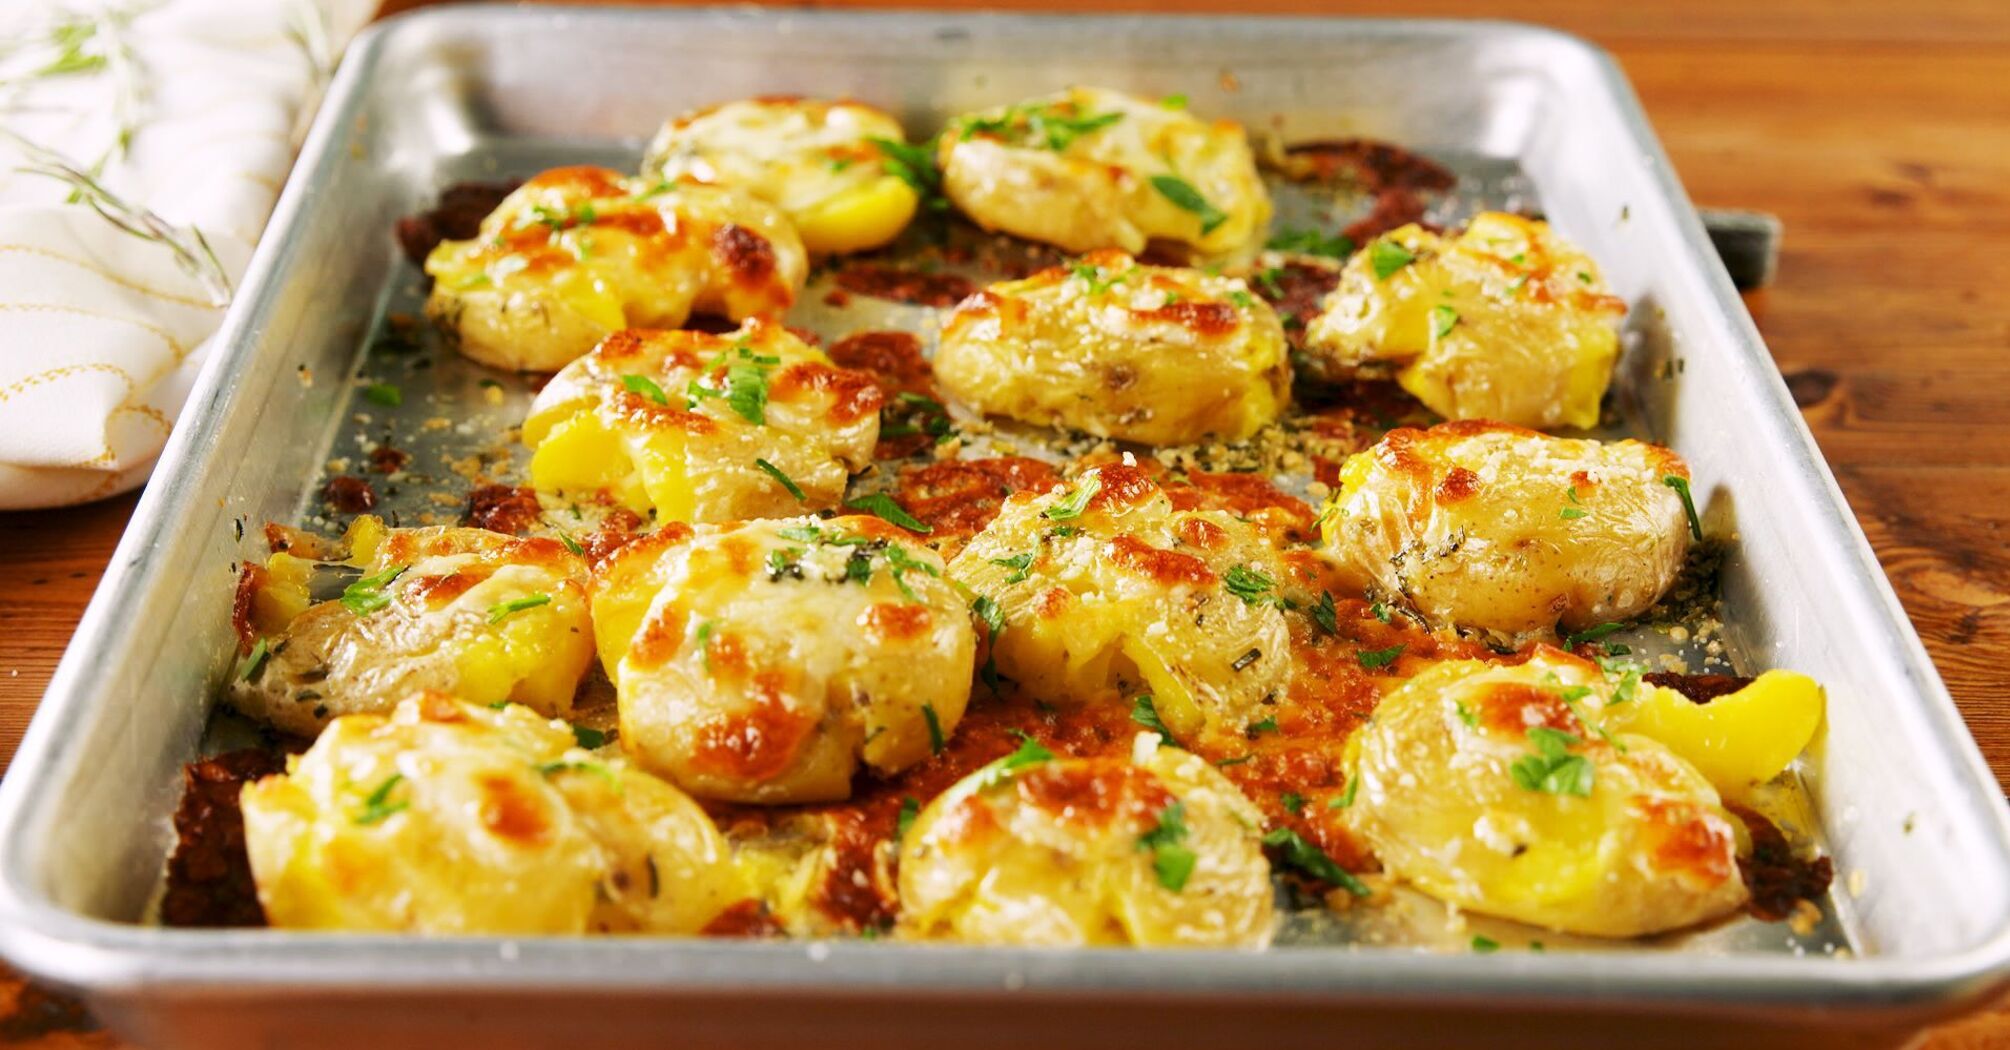 Baked new potatoes with sausages: we share a recipe for a hearty dish